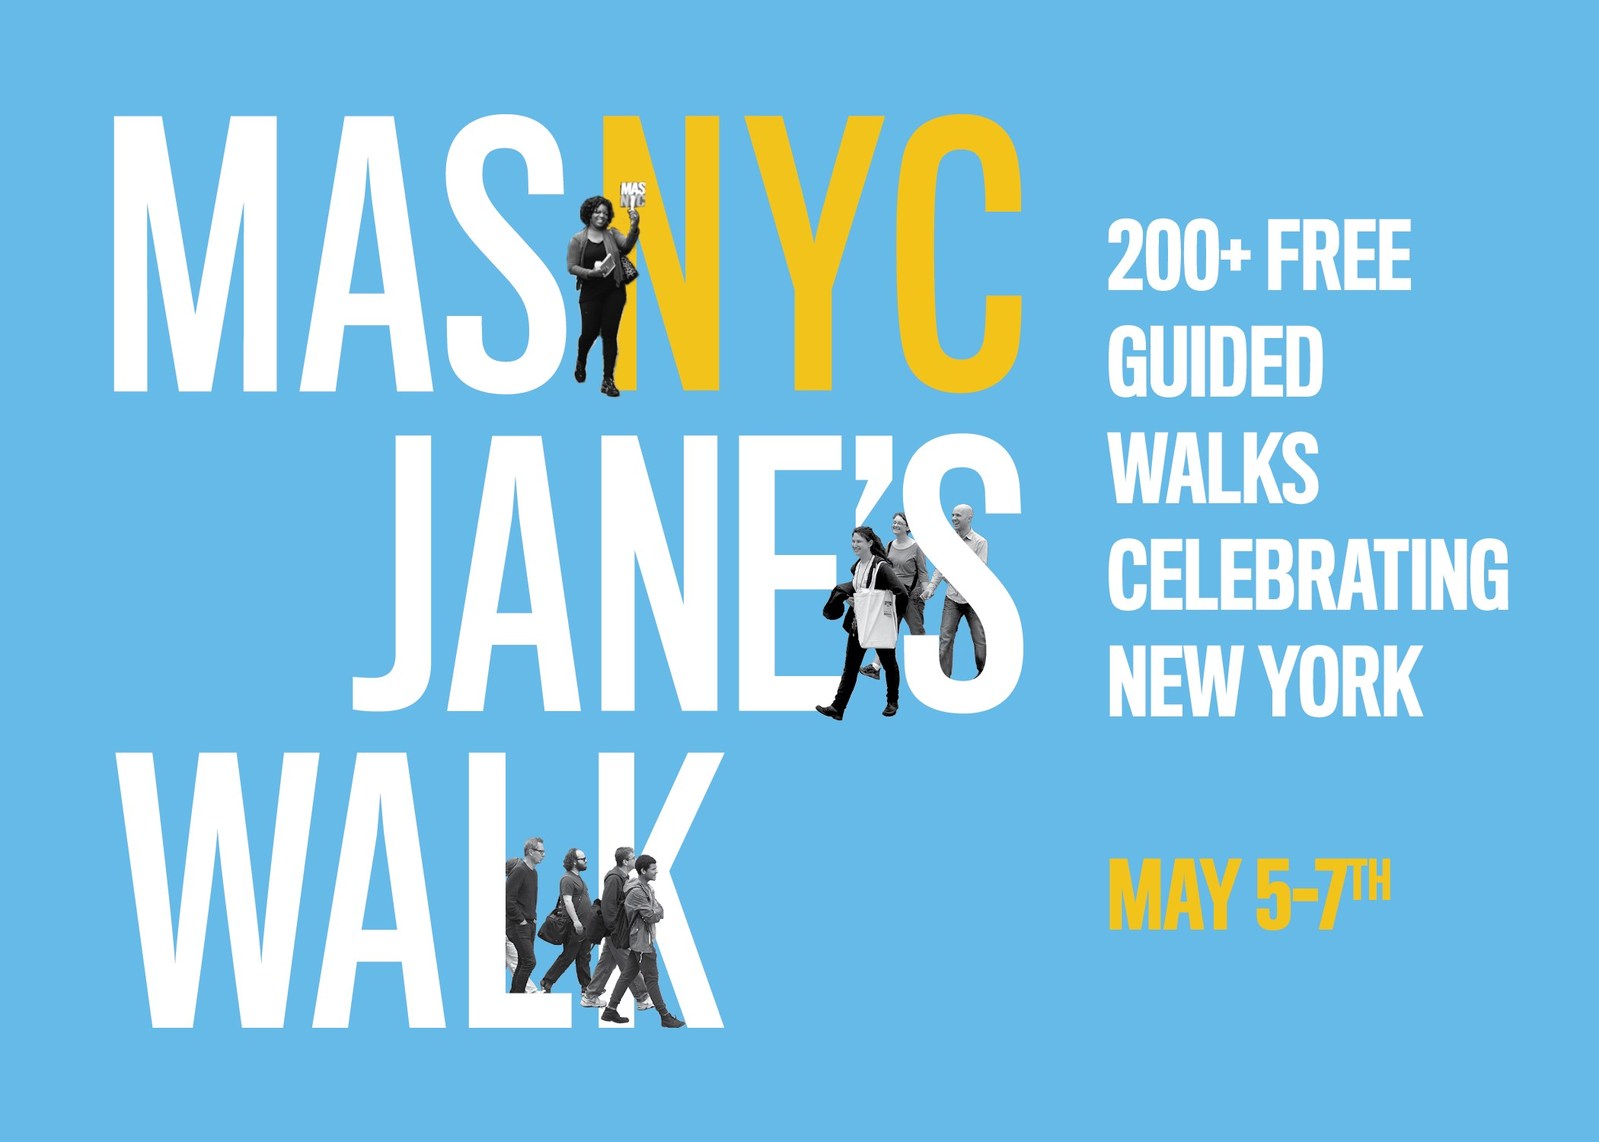 Over 200 FREE NYC Walking Tours Happening This Weekend